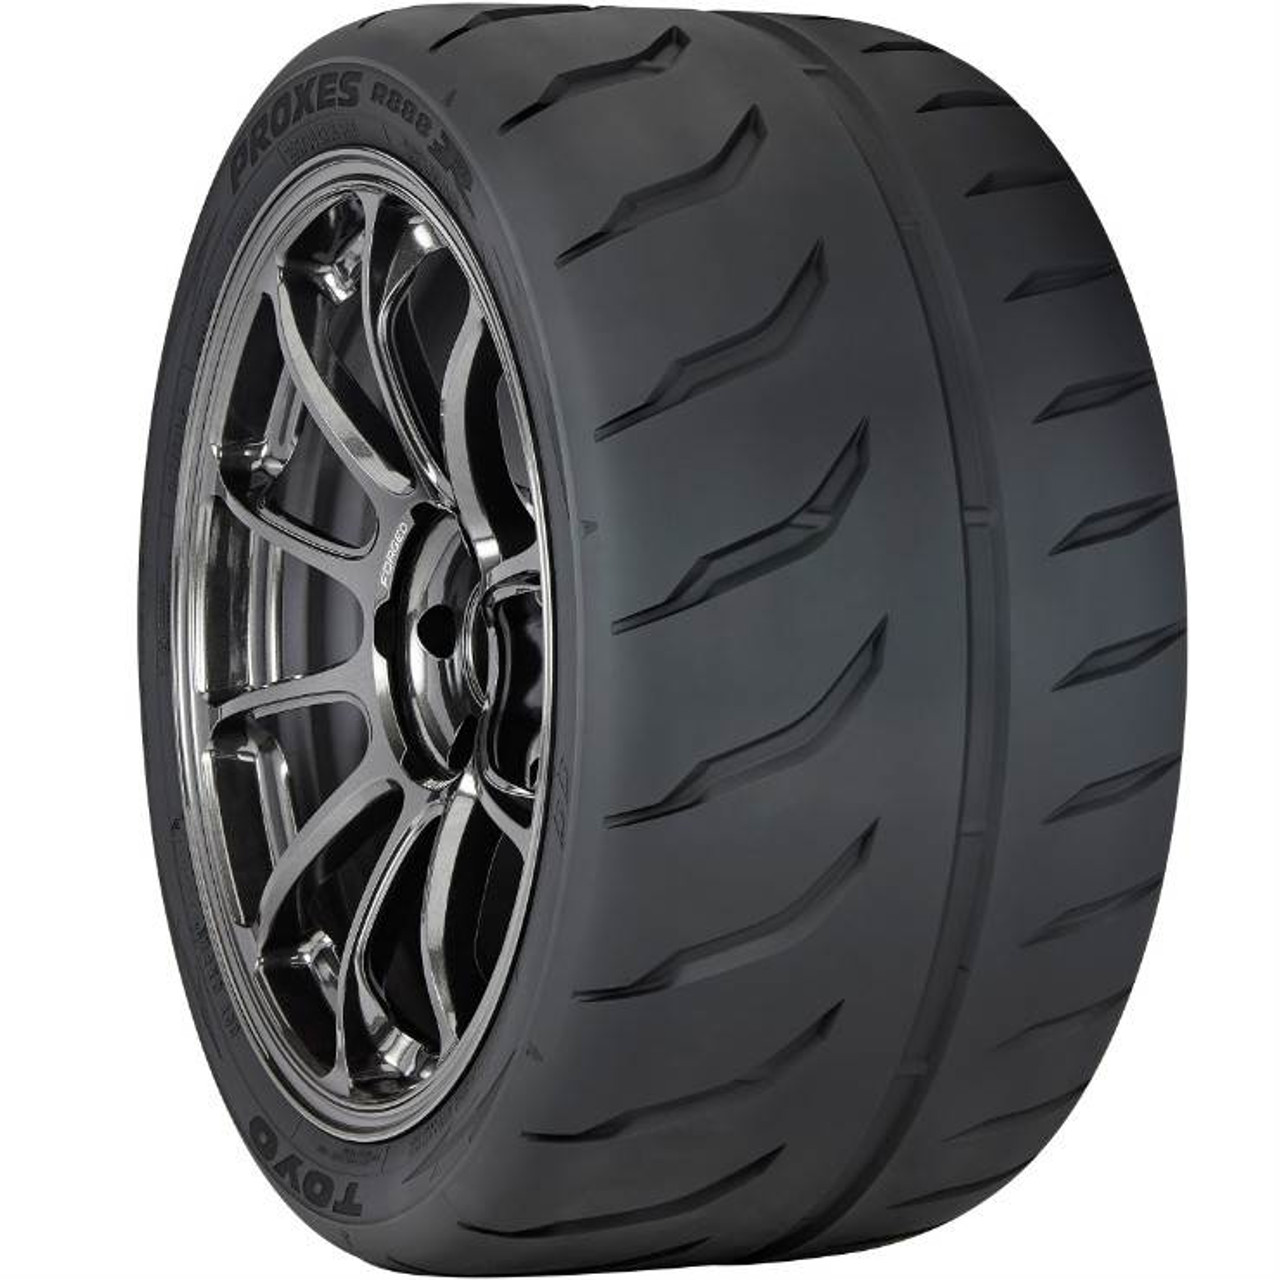 16-22+ Camaro, Corvette, Others, Proxes R888R DOT Competition Tire, 295/30ZR19, Toyo Tires